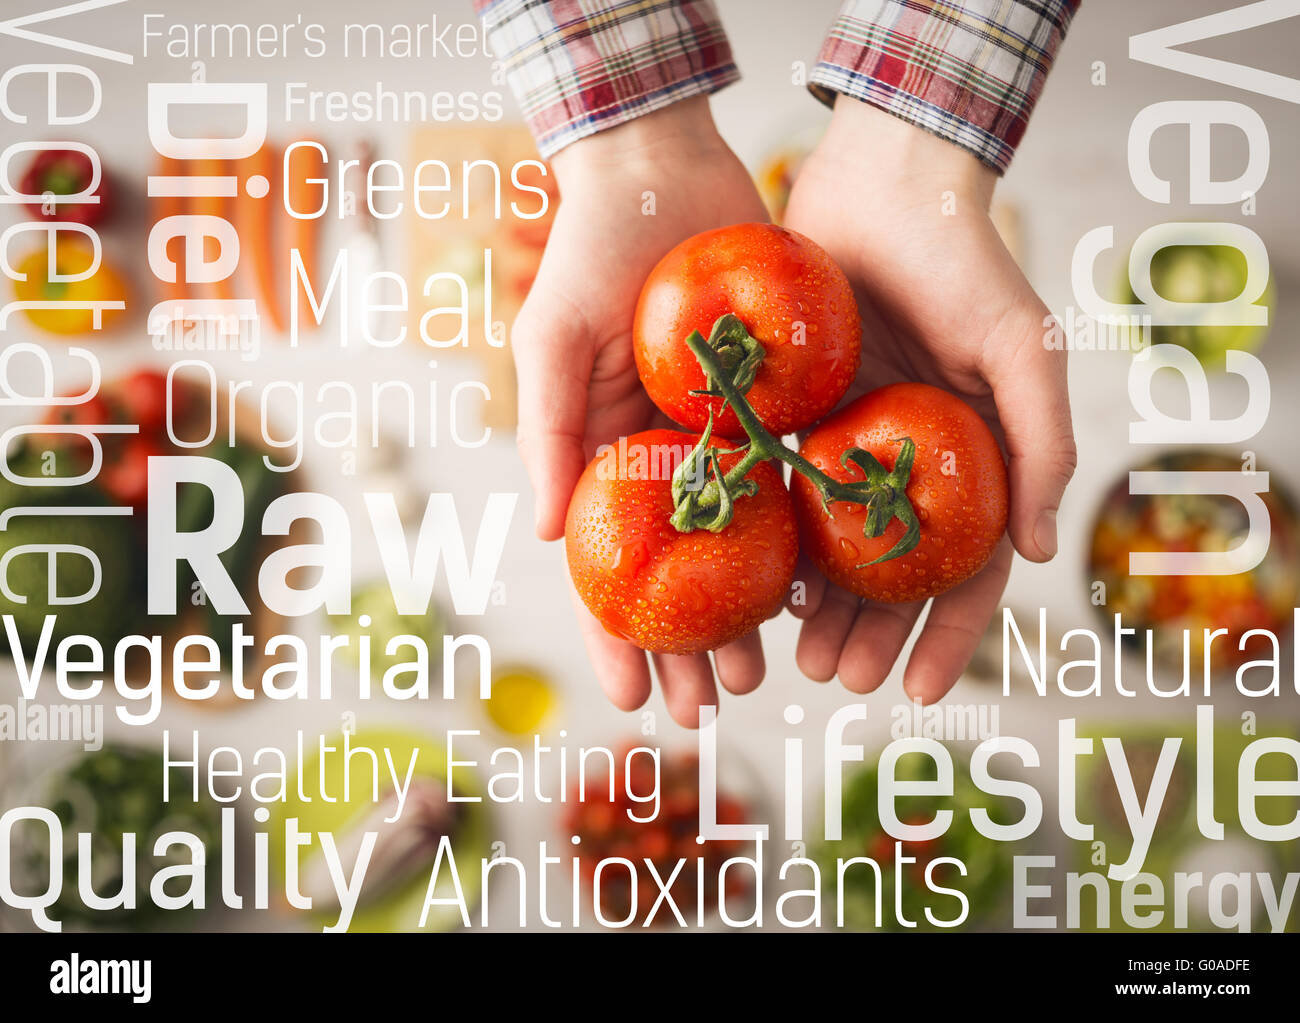 Hands holding fresh juicy tomatoes, vegetables and food ingredients on background and nutrition text concepts Stock Photo